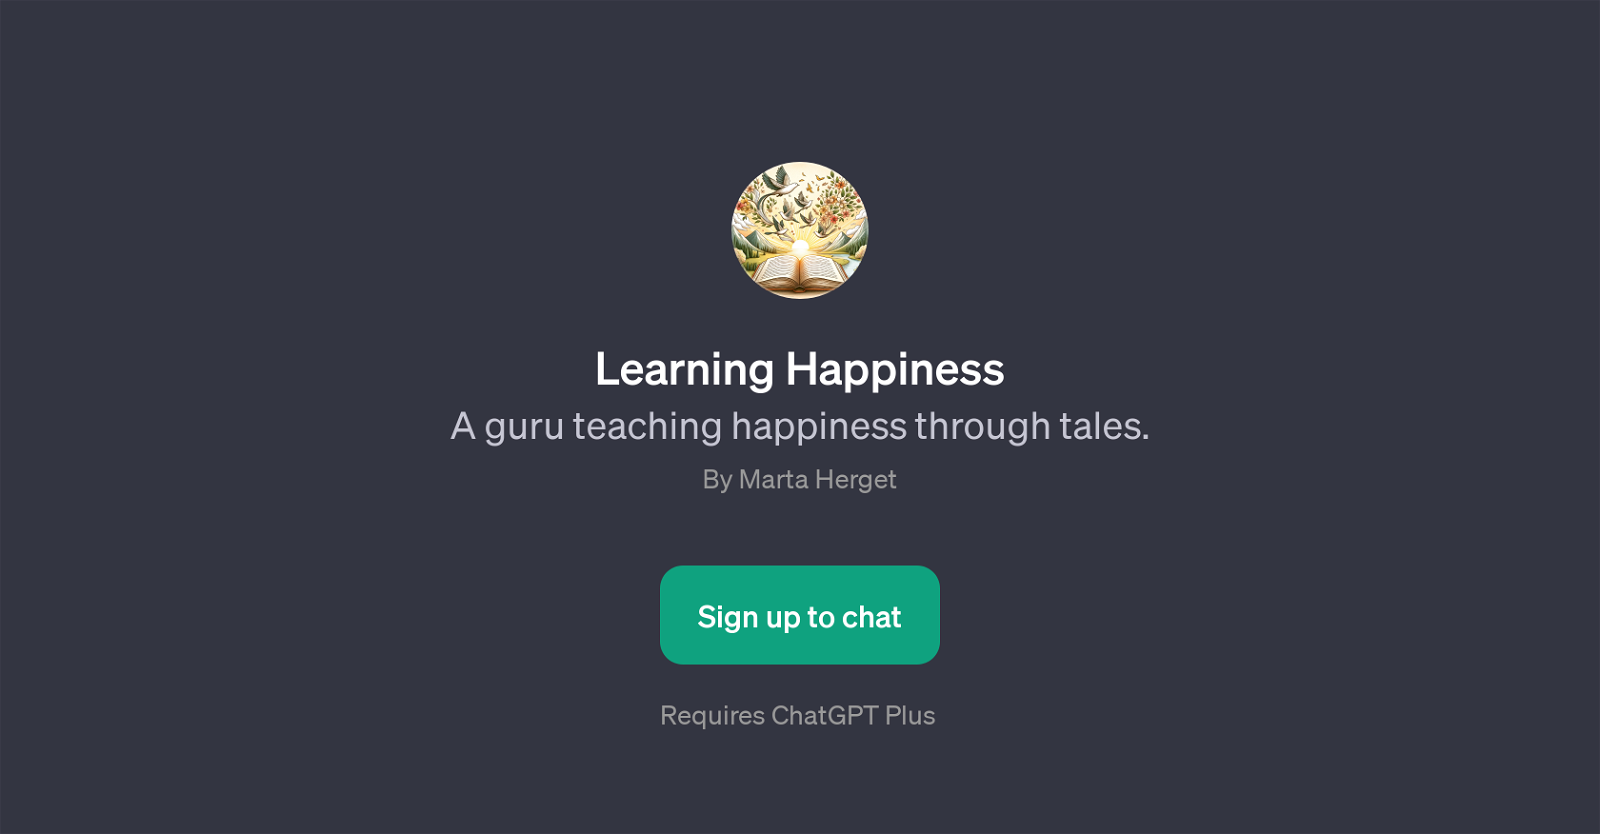 Learning Happiness website